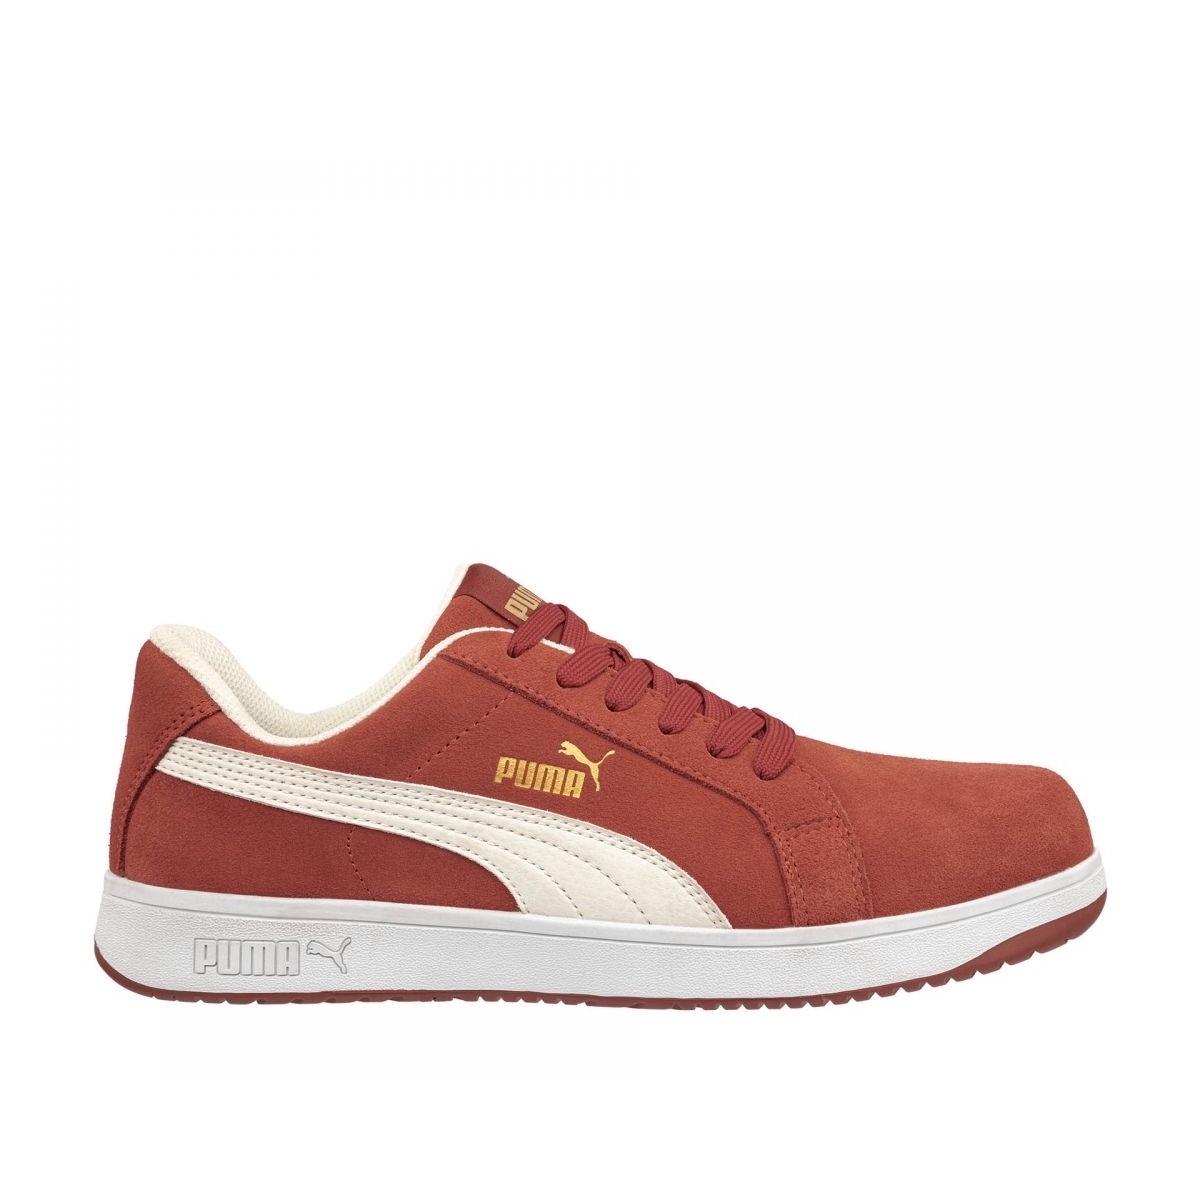 PUMA Safety Men's Iconic Low Composite Toe EH Work Shoes Red Suede - 640045 ONE SIZE RED - RED, 8.5